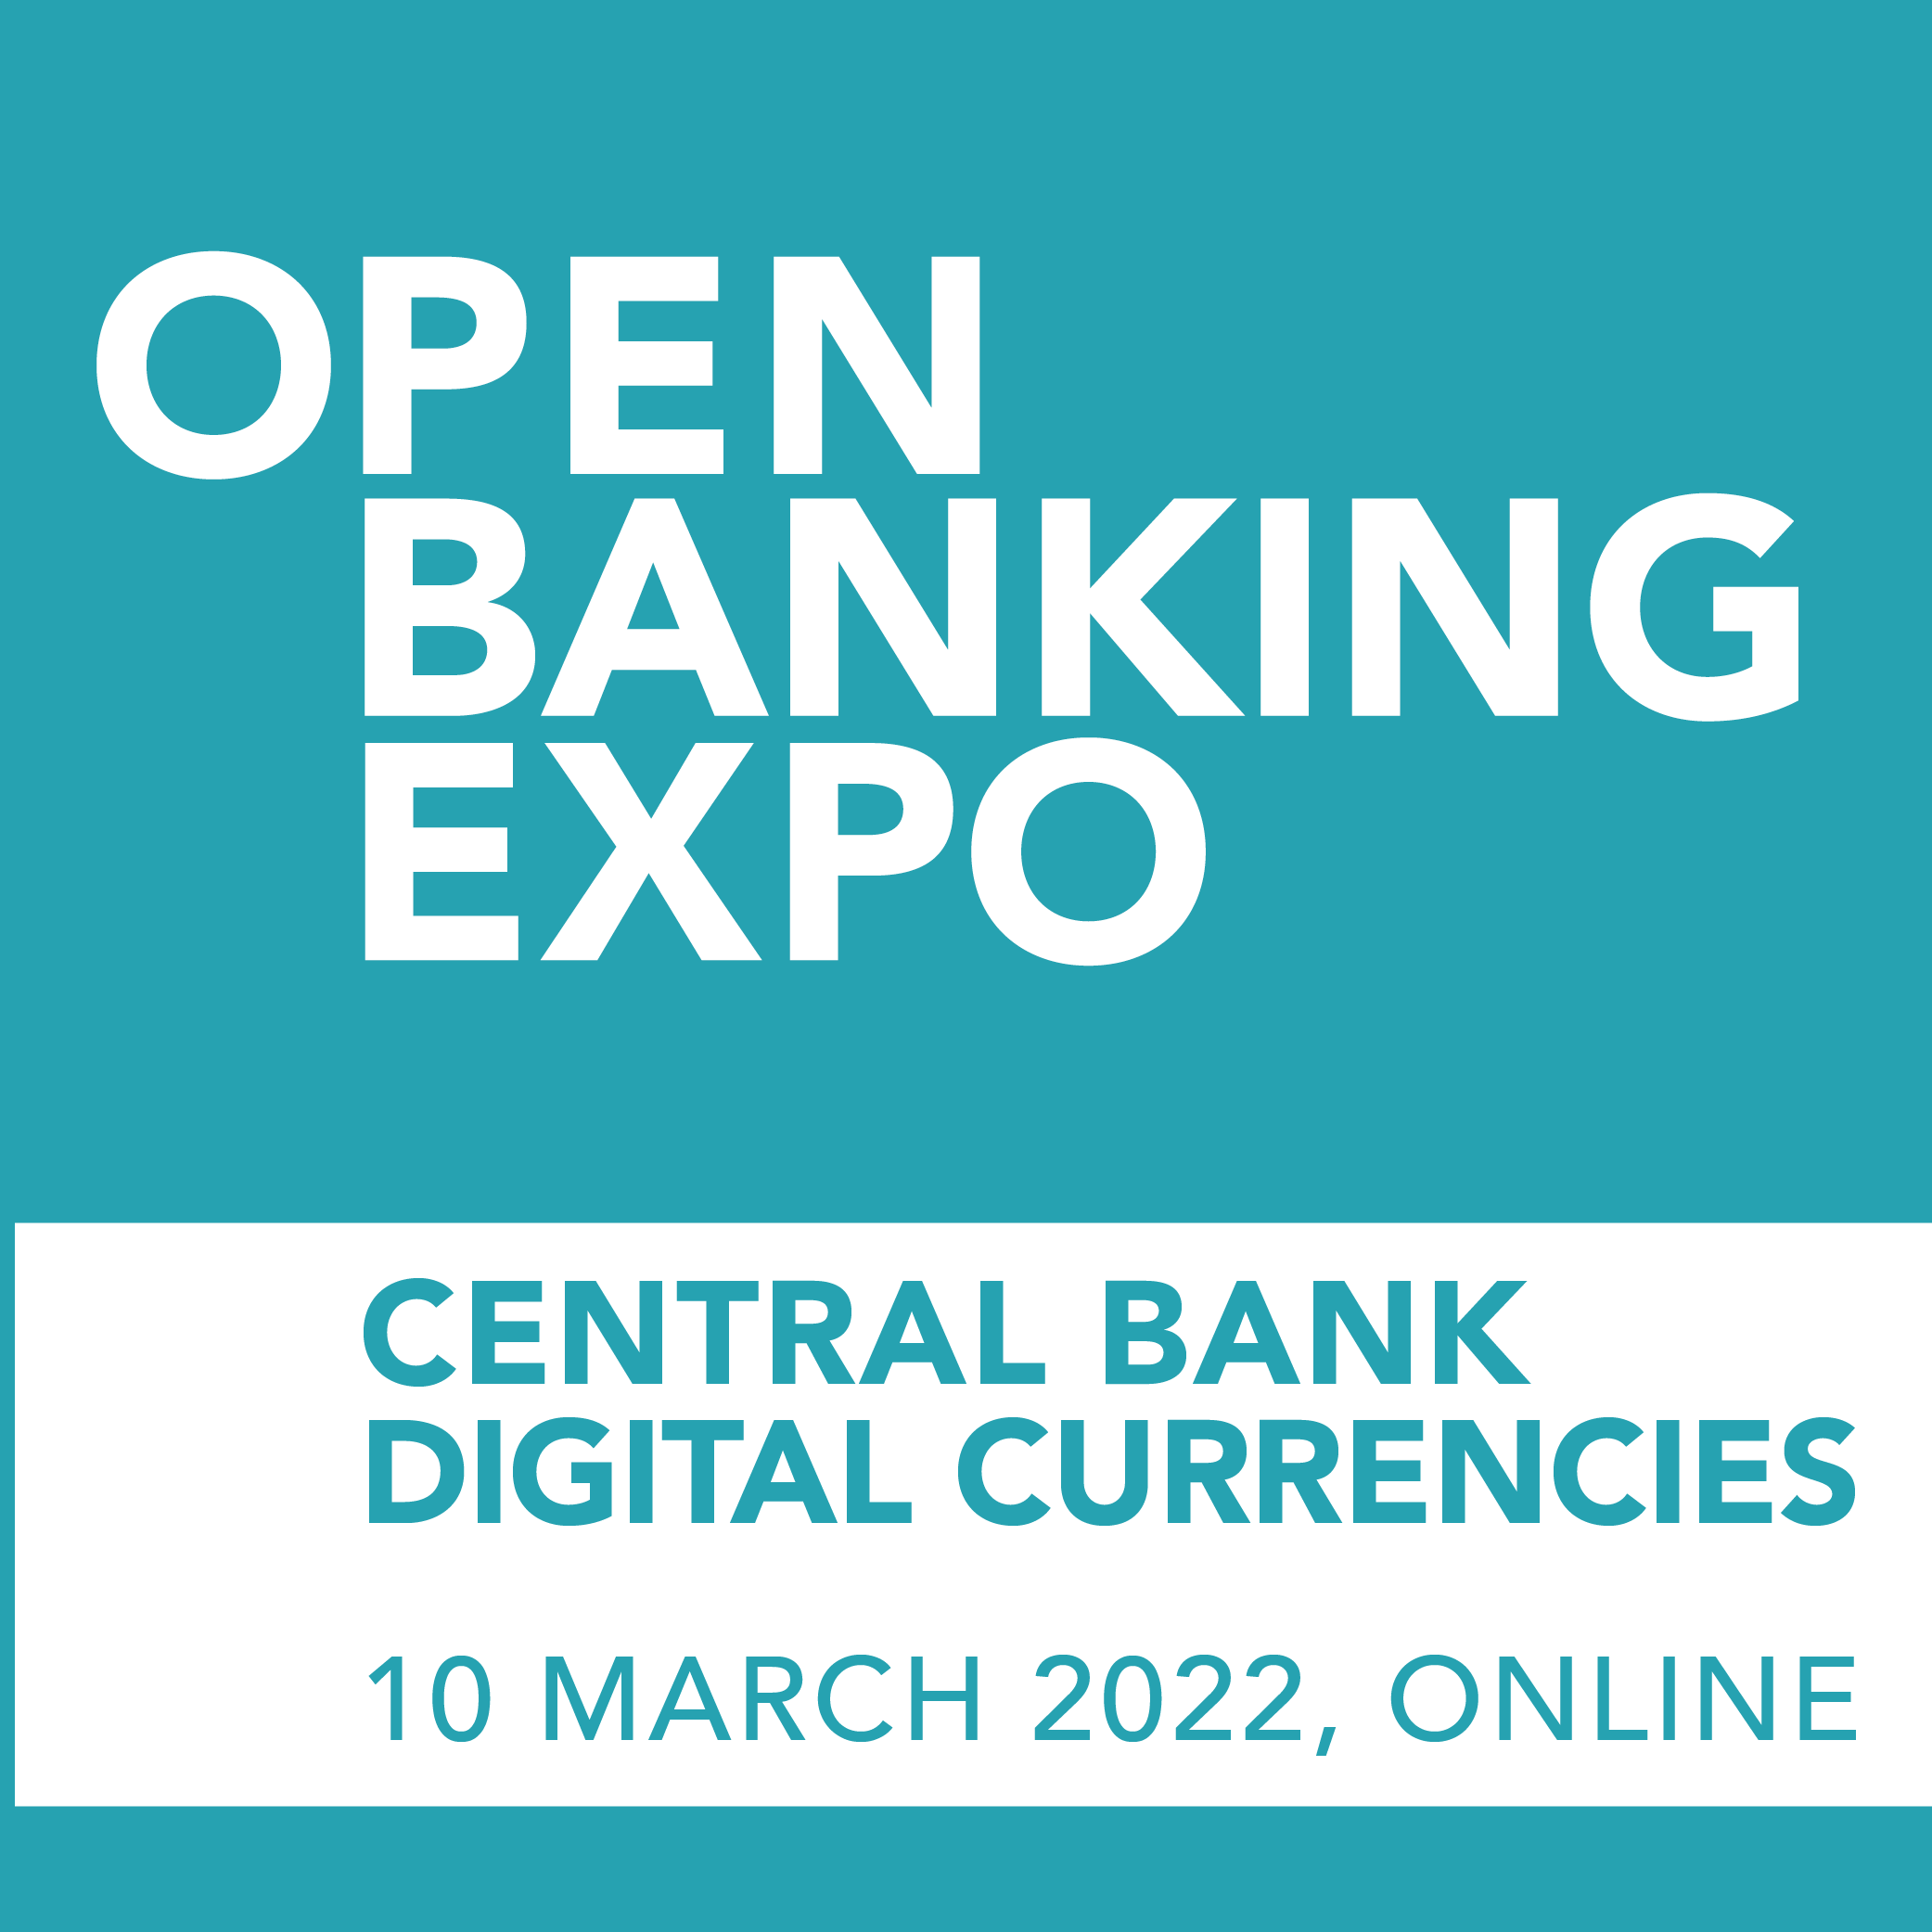 Central Bank Digital Currencies organized by Open Banking Expo